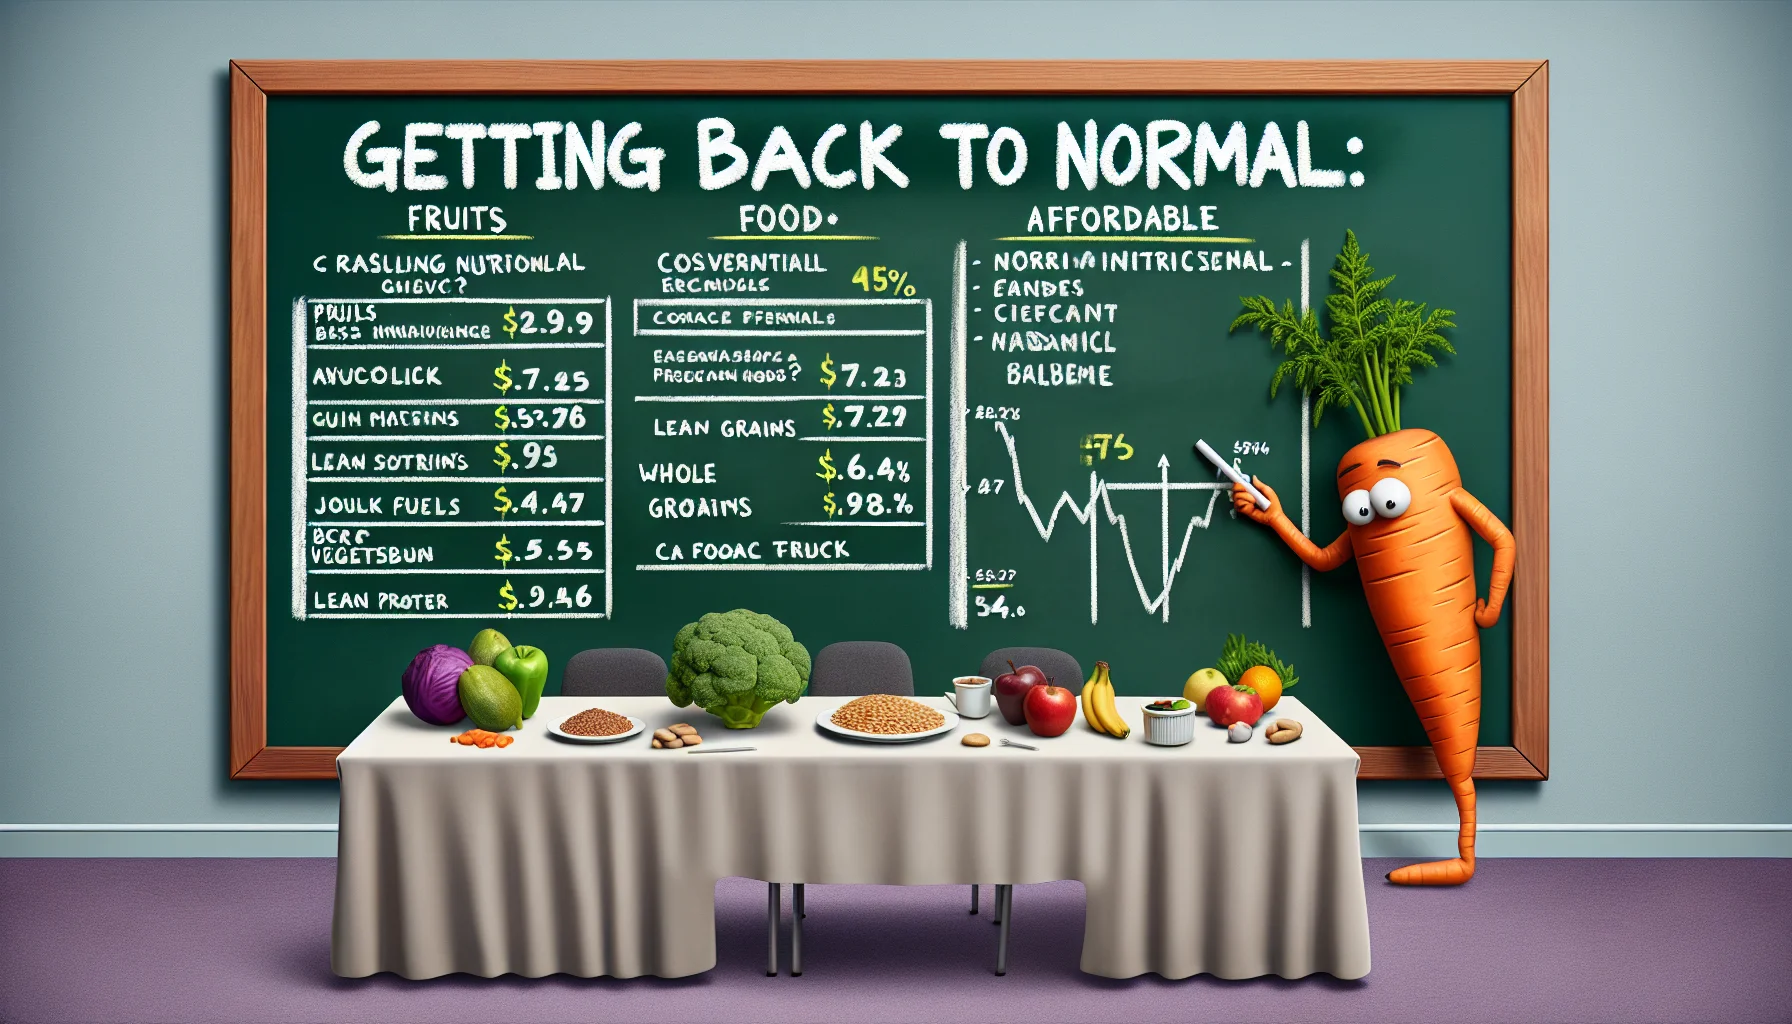 Present an amusing scenario highlighting the theme of 'Getting Back to Normal: Menu Planning'. Consider the image to have a large chalkboard detailing a meal plan with nutritional and affordable food items. Include some humorous elements, like a carrot behaving like a cost-efficient financial advisor or a group of fruits and vegetables enacting a price drop in the stock market. Enhance the appeal by adding an illustration of a balanced meal consisting of fruits, whole grains, lean proteins, and vegetables with price tags showcasing affordability.